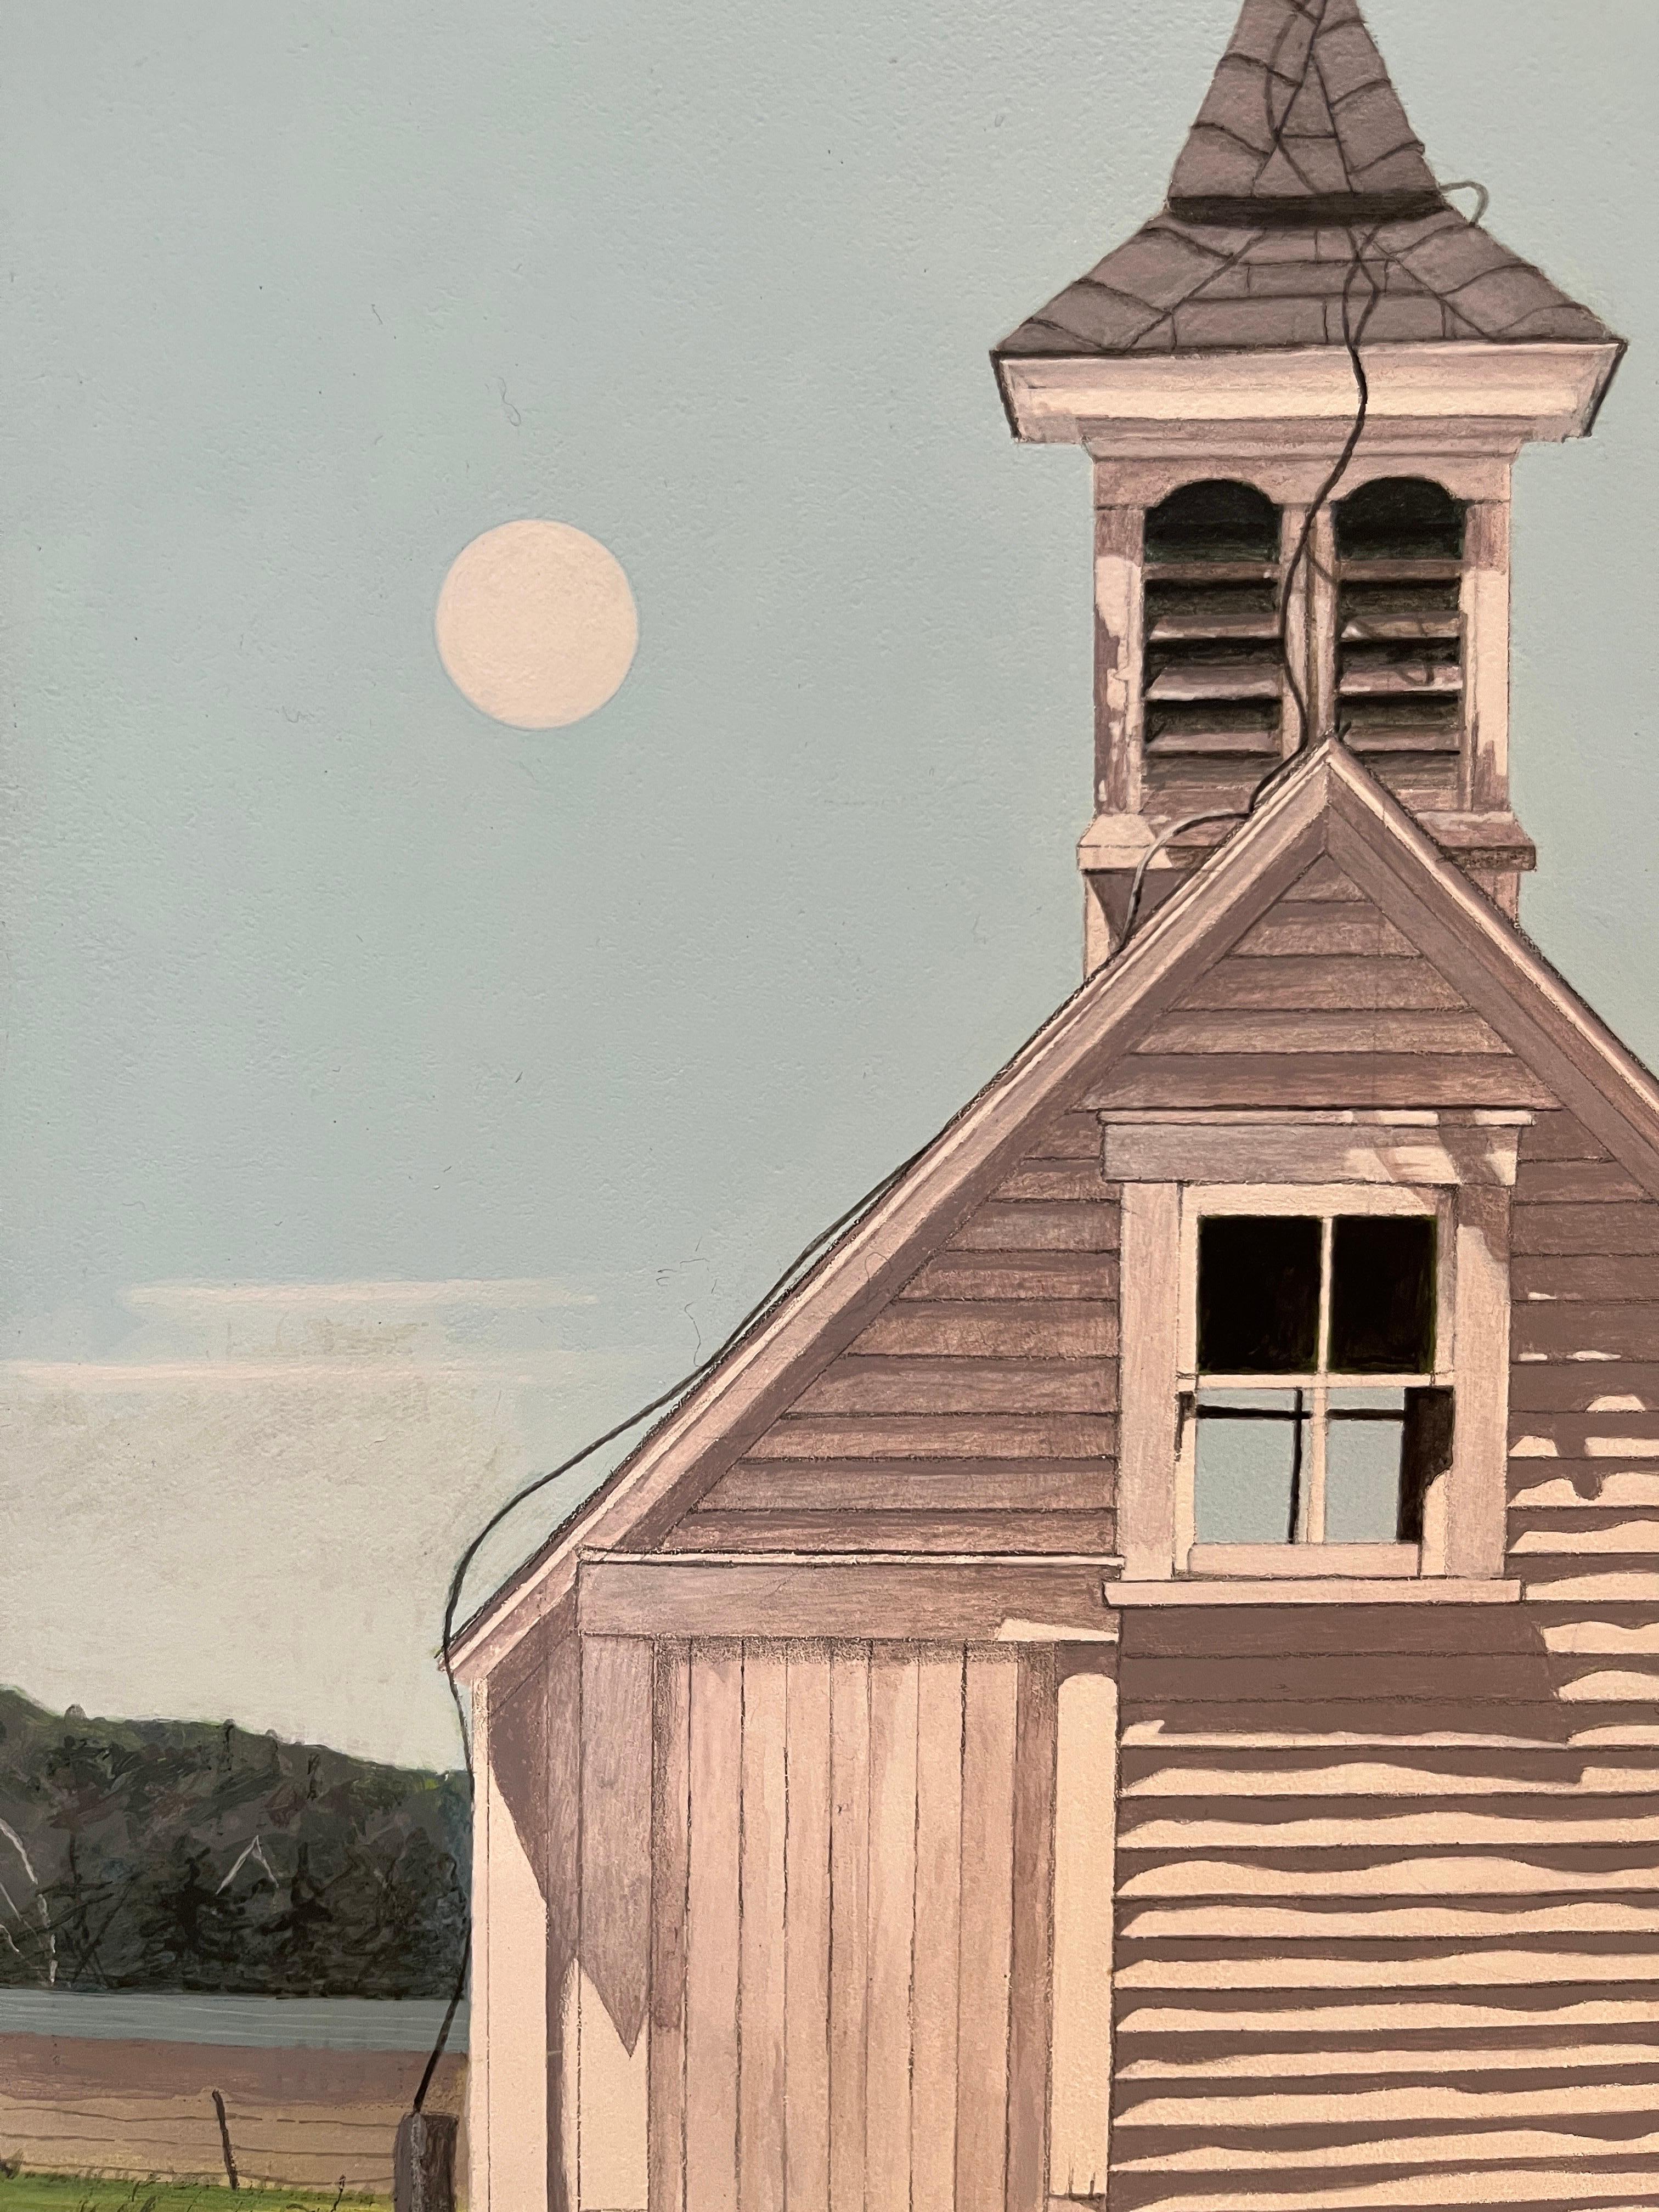 Linda Hefner is known for her vibrant acrylic paintings of historical New England barns and architecture. Hefner’s love of endangered Americana is rooted in the past, including her own: she spent formative years of her childhood among enduring